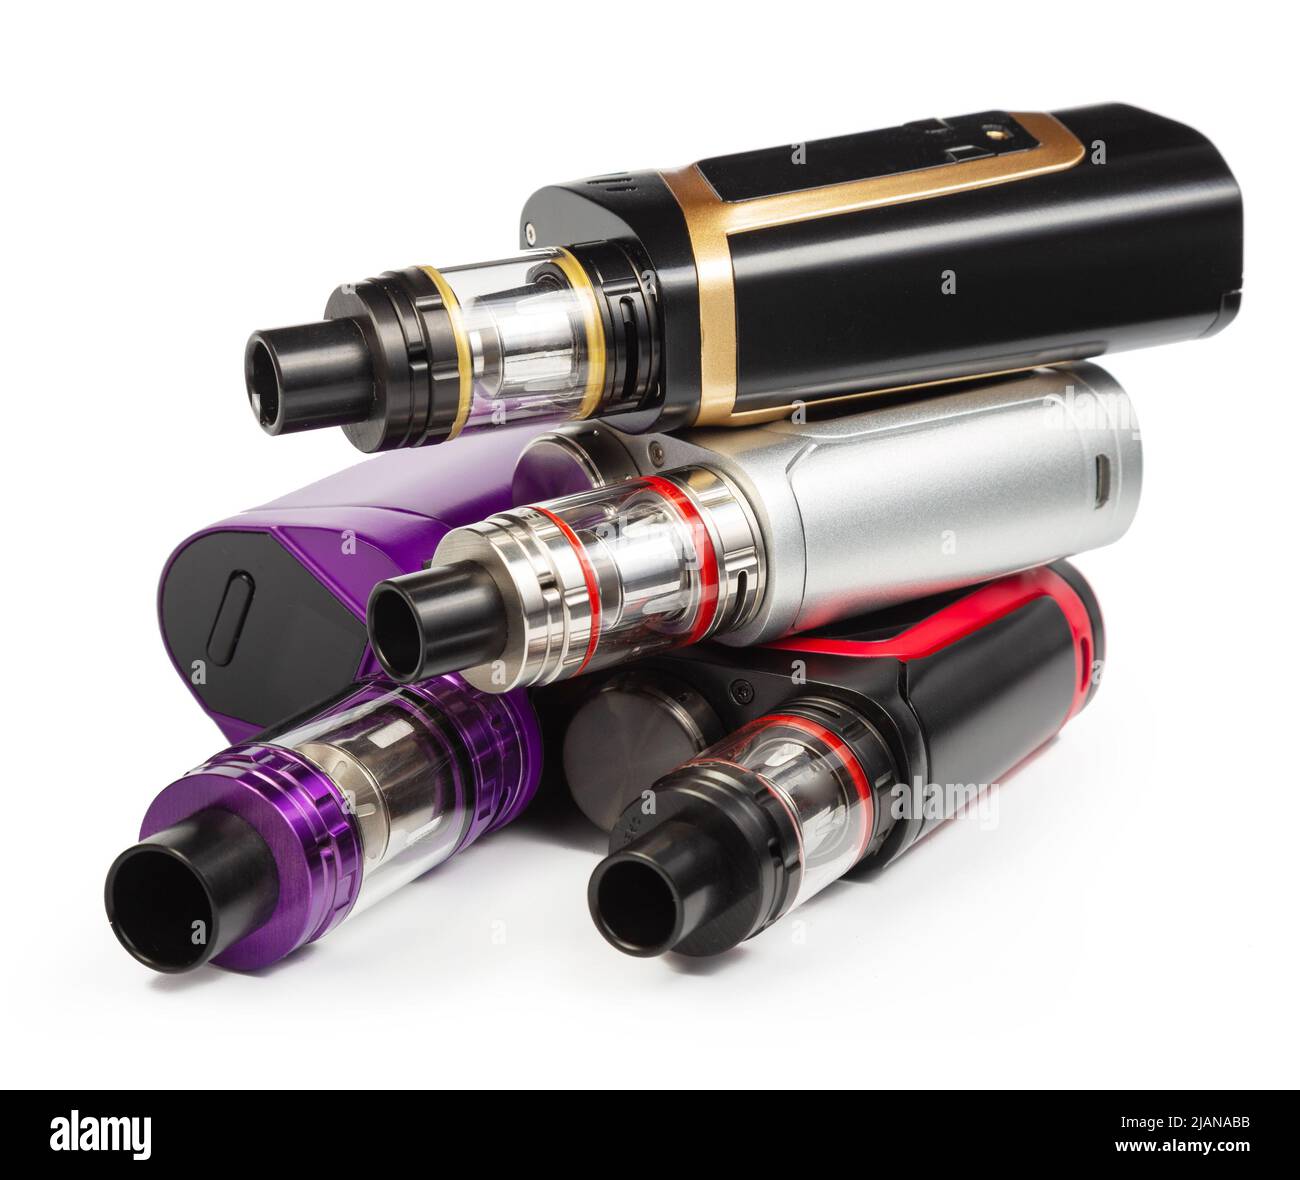 Popular vaping device mod. Modern vaporizer e-cig devices. New device model,micro coil clearomizer. Stock Photo